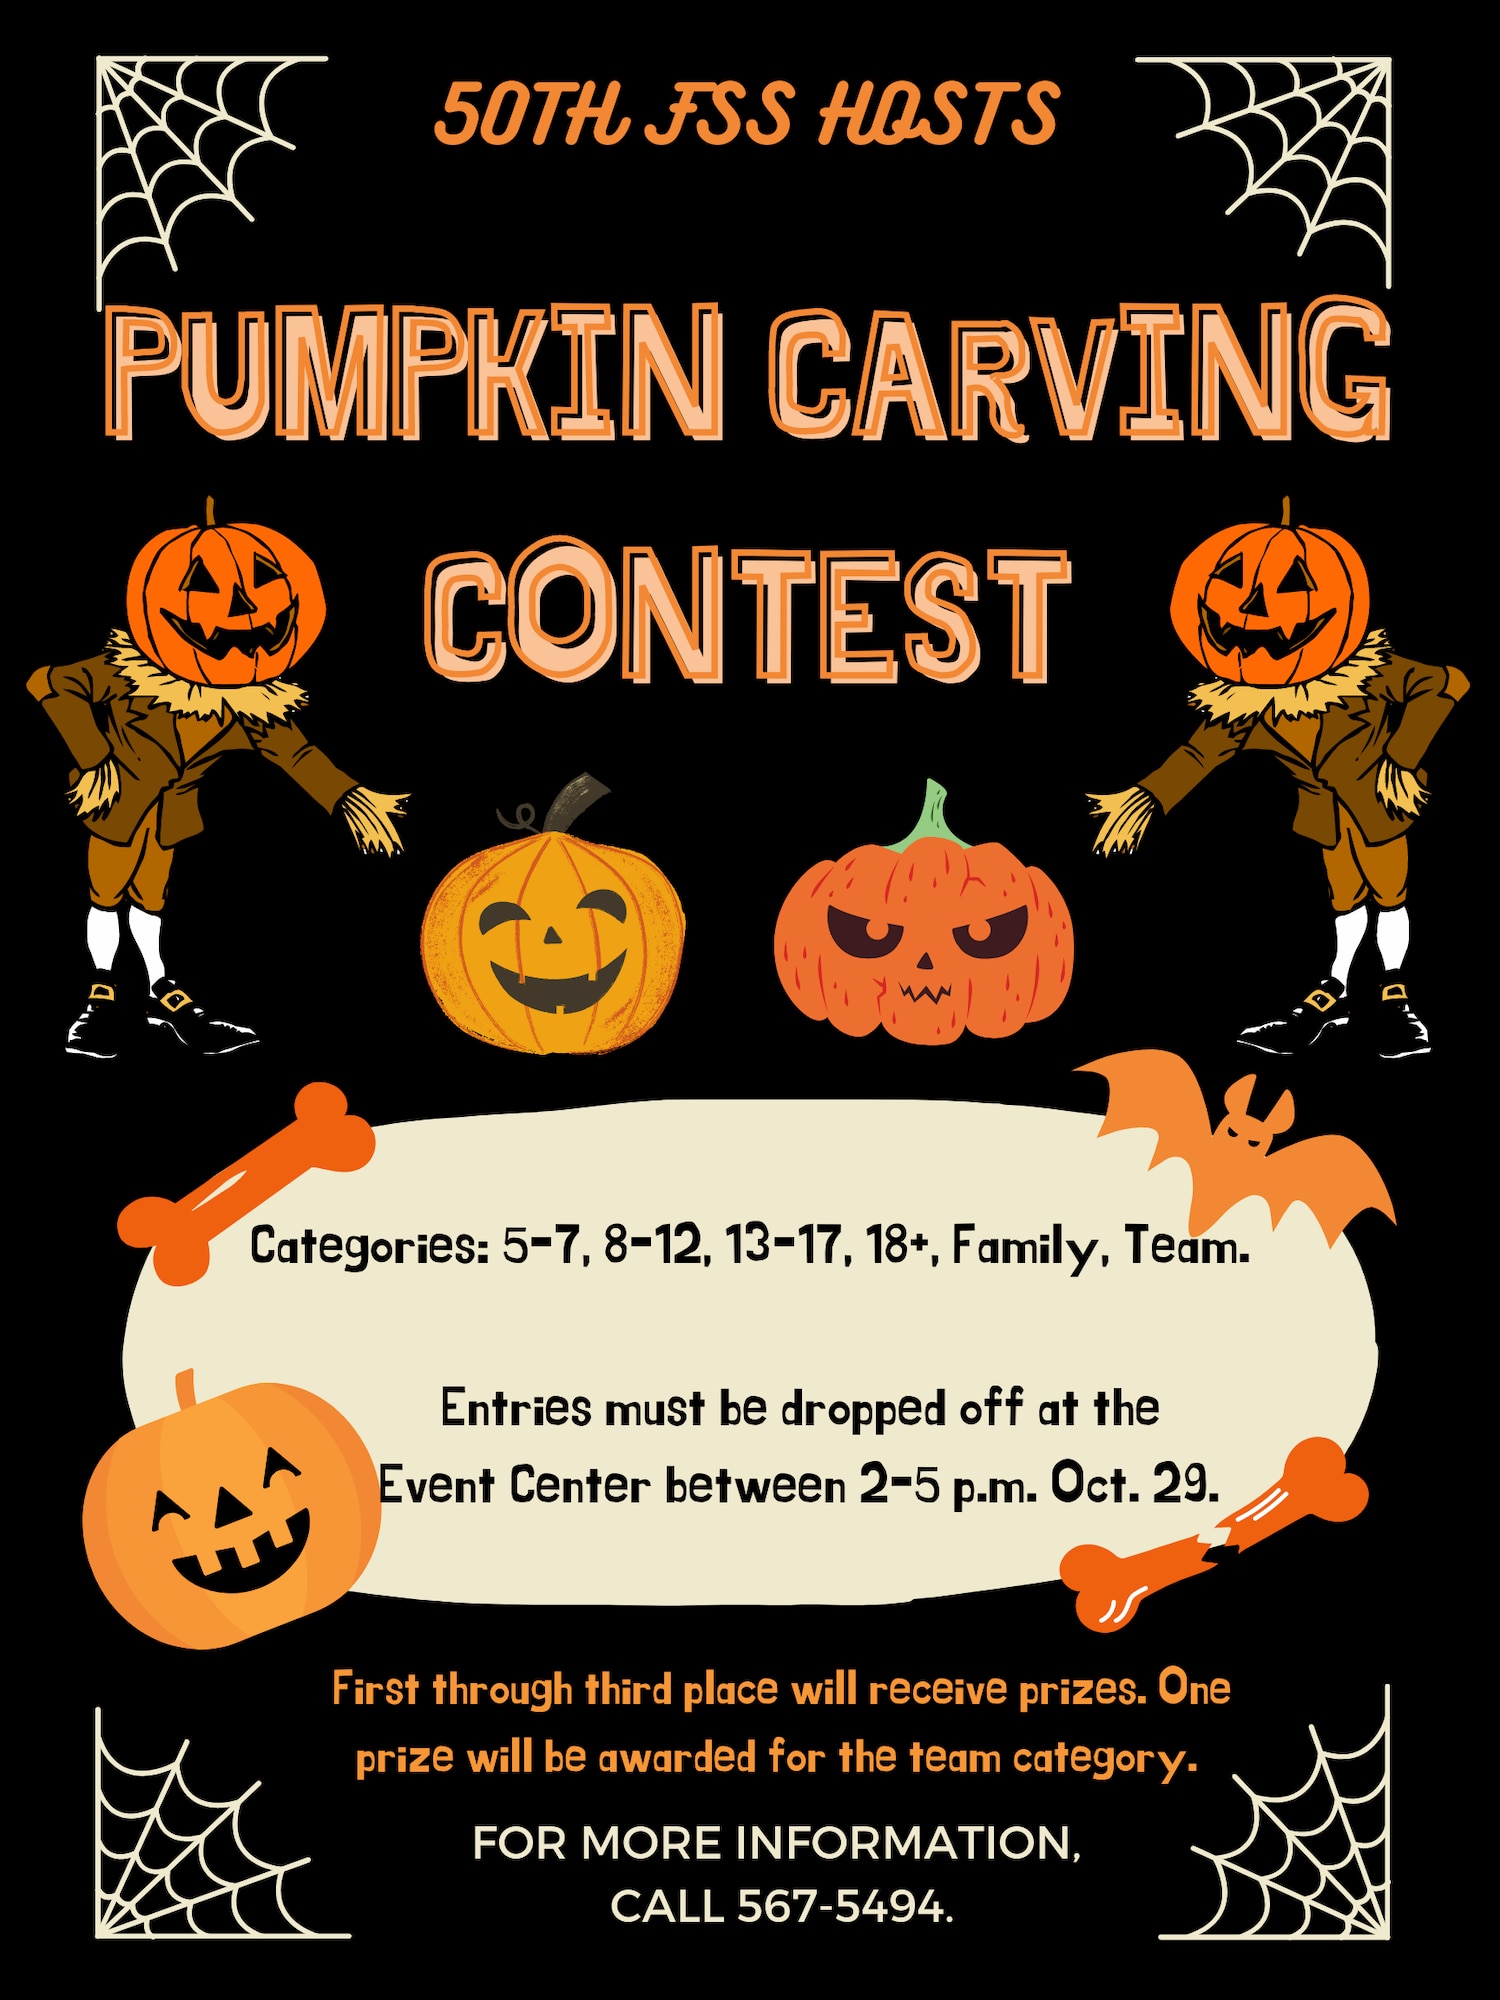 The 50th Force Support Squadron is scheduled to host a pumpkin carving contest Oct. 29, 2020, at Schriever Air Force Base, Colorado. Pumpkins can be picked up at the Child Development Center on Monday. Pumpkins must be dropped off at the Event Center between 2-5 p.m. Oct. 29. The contest will have multiple categories including ages 5-7, 8-12, 13-17, 18 and older, family and team. Prizes will be awarded for first through third place in all categories except for team, which will only have a first place winner. All entries in the event will be displayed in the 50th FSS’s Jack-O’-Lantern Jubilee, which takes place from 3-5 p.m. Oct. 30 at Bldg. 20. (U.S. Space Force graphic by Marcus Hill)